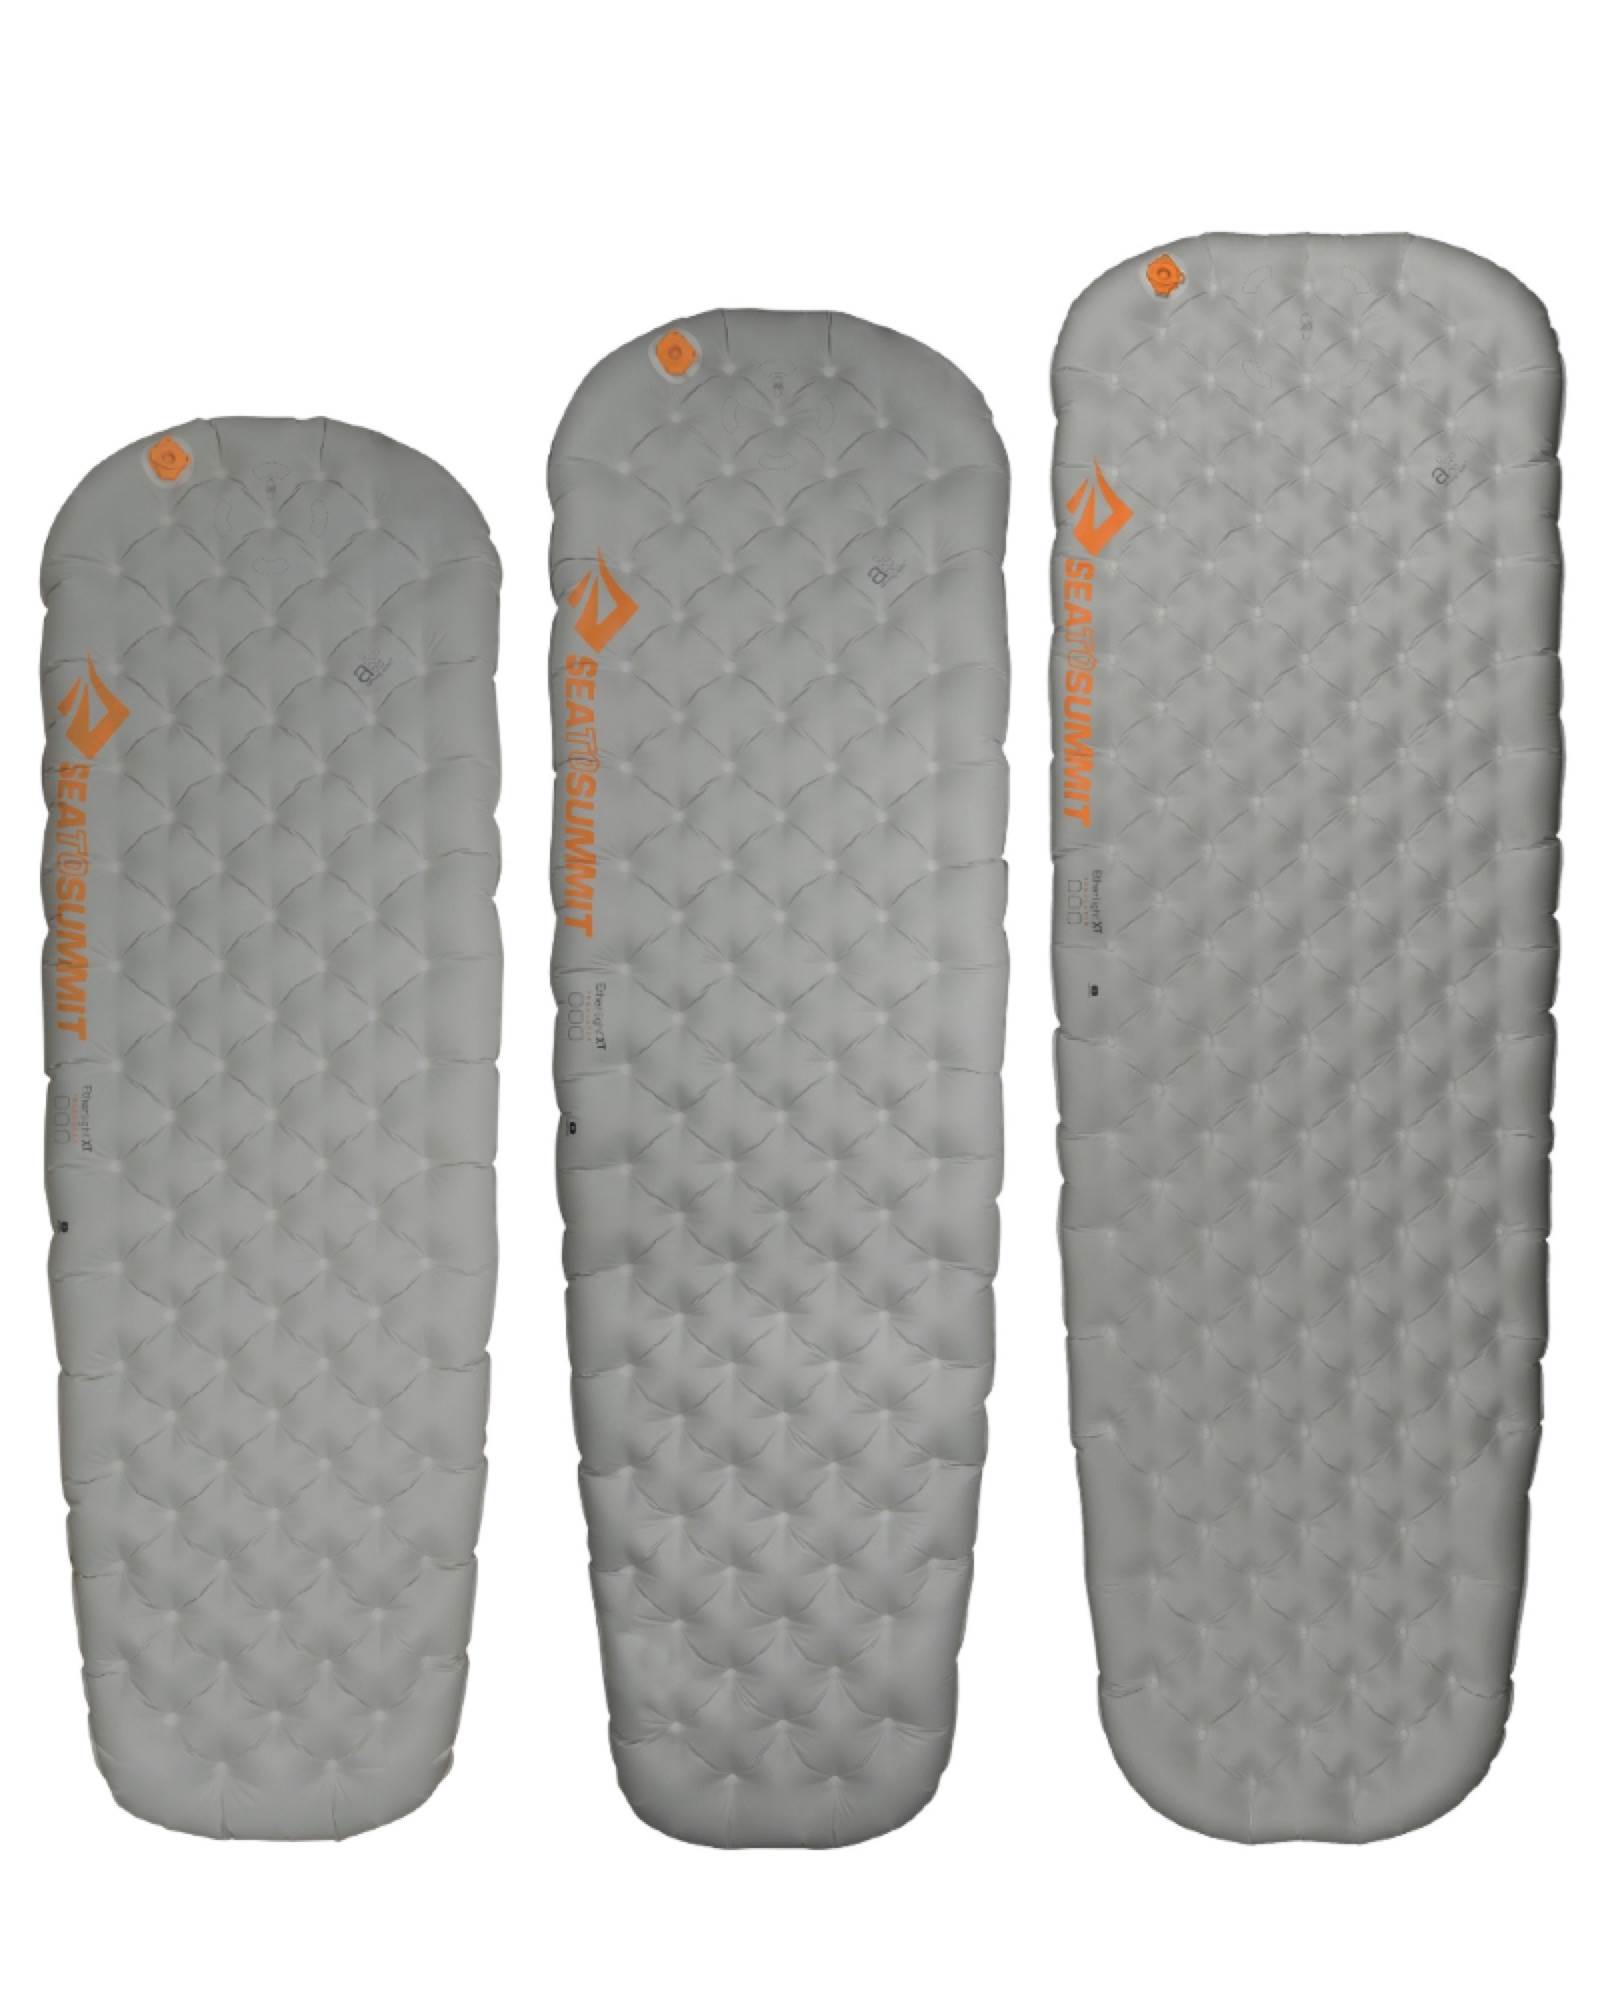 Sea to Summit Ether Light XT Insulated Sleeping Mat with Airstream